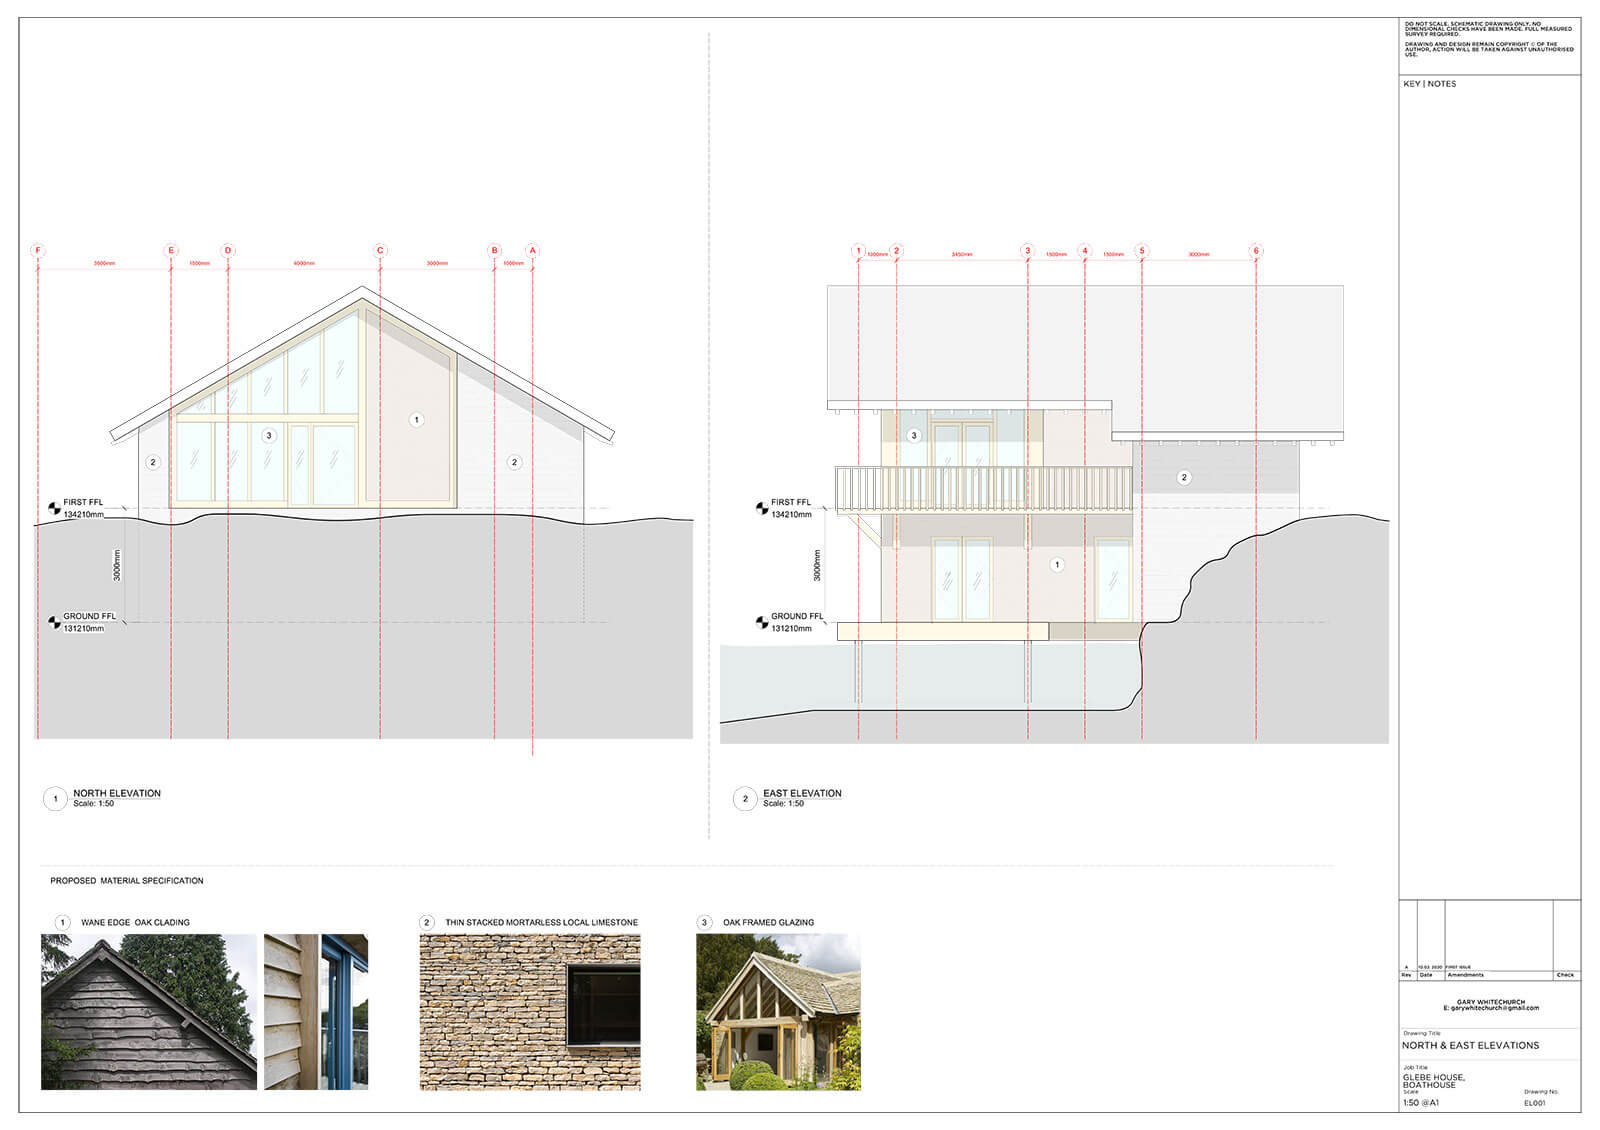 Architectural drawing for feasibility studies